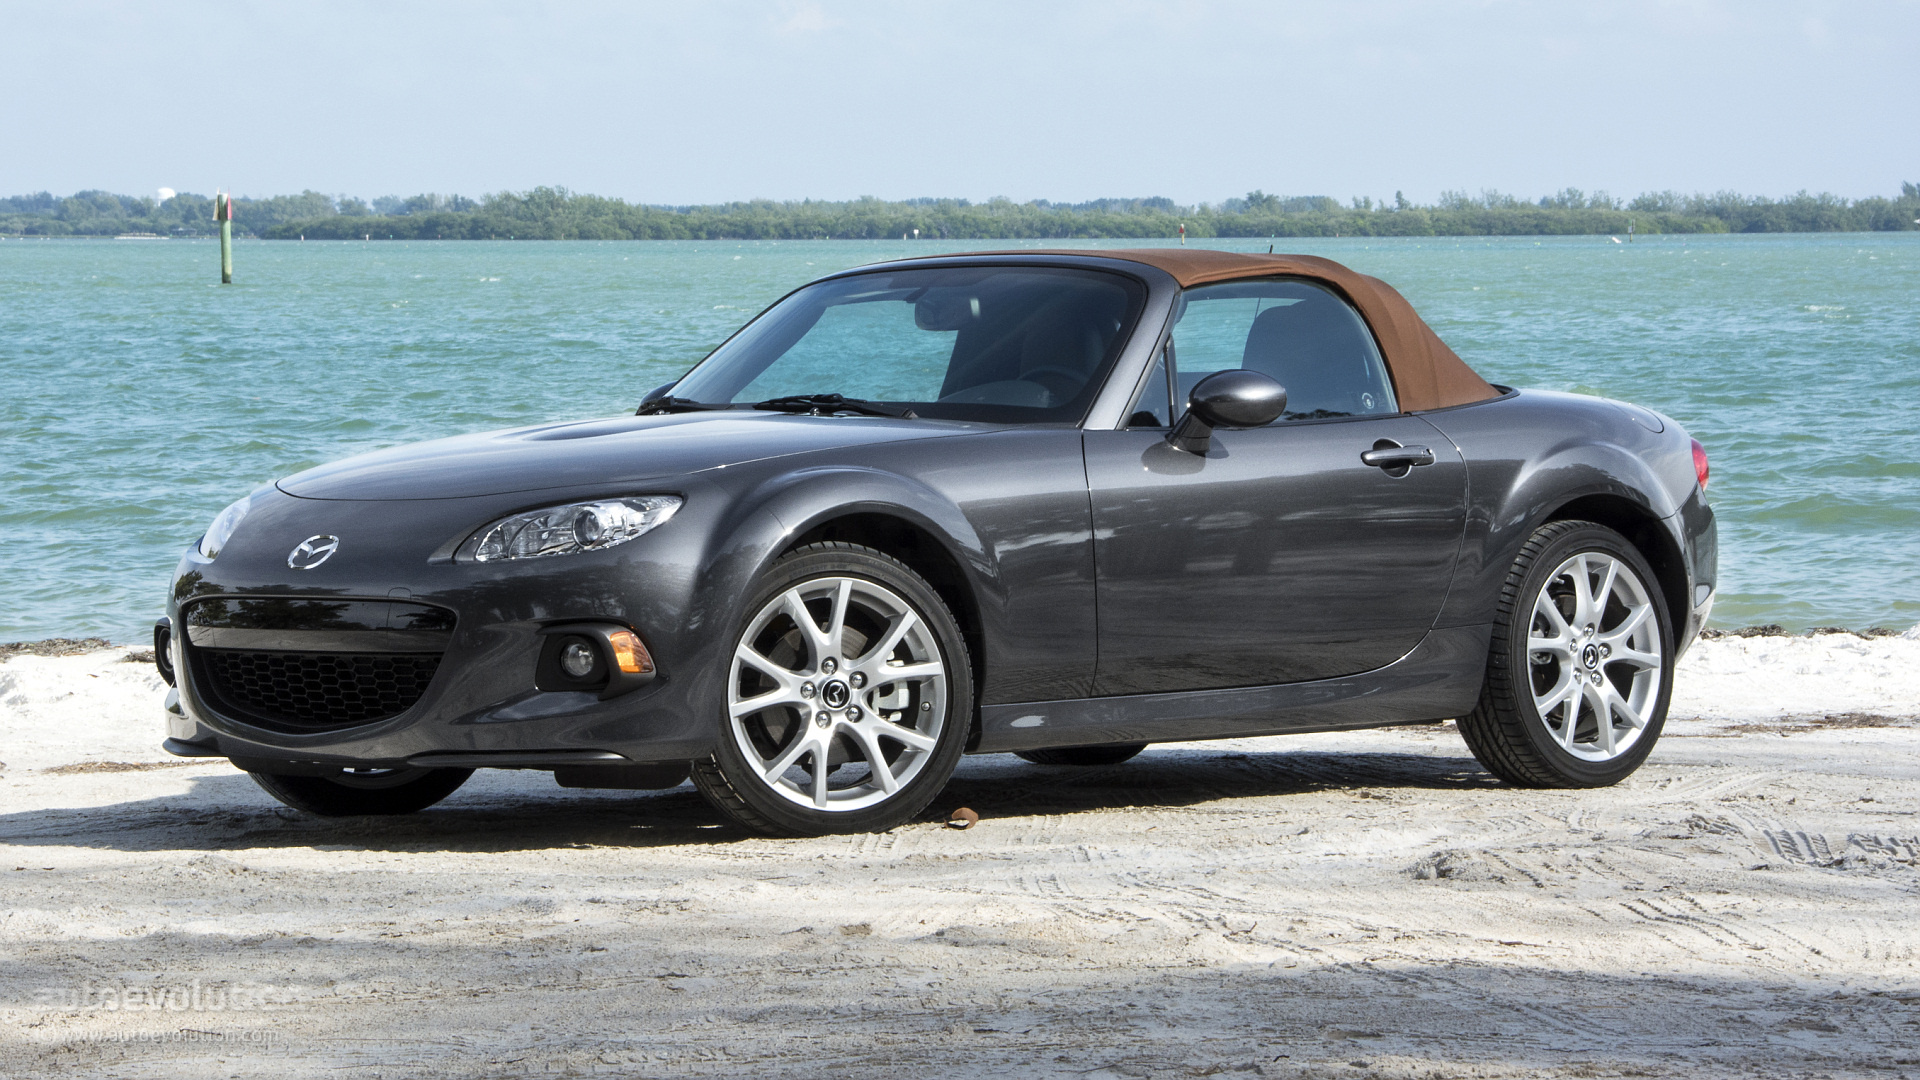 98 Mazda MX 5, Wallpapers collection, Classic roadster, 1920x1080 Full HD Desktop